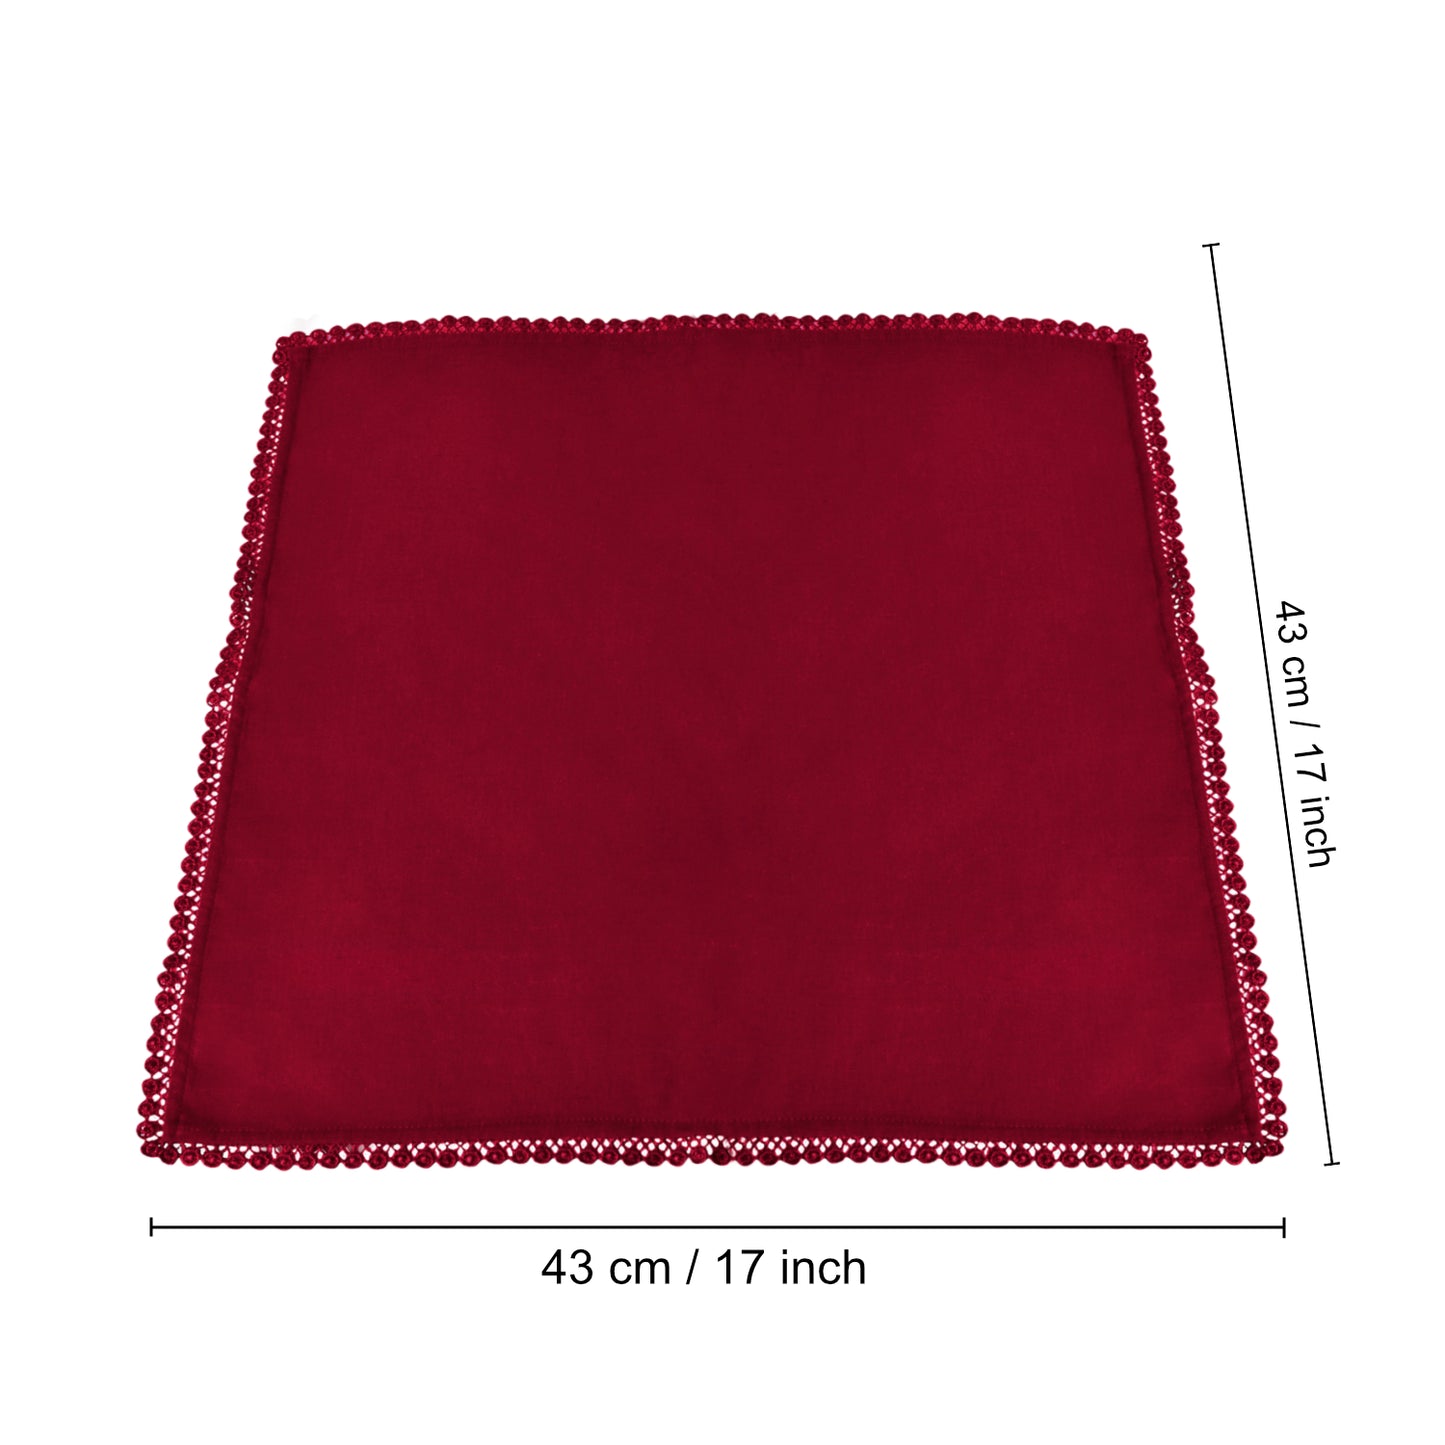 Dining Table Premium Cotton Table Napkin with Crochet Ends (Set of 6, Maroon)